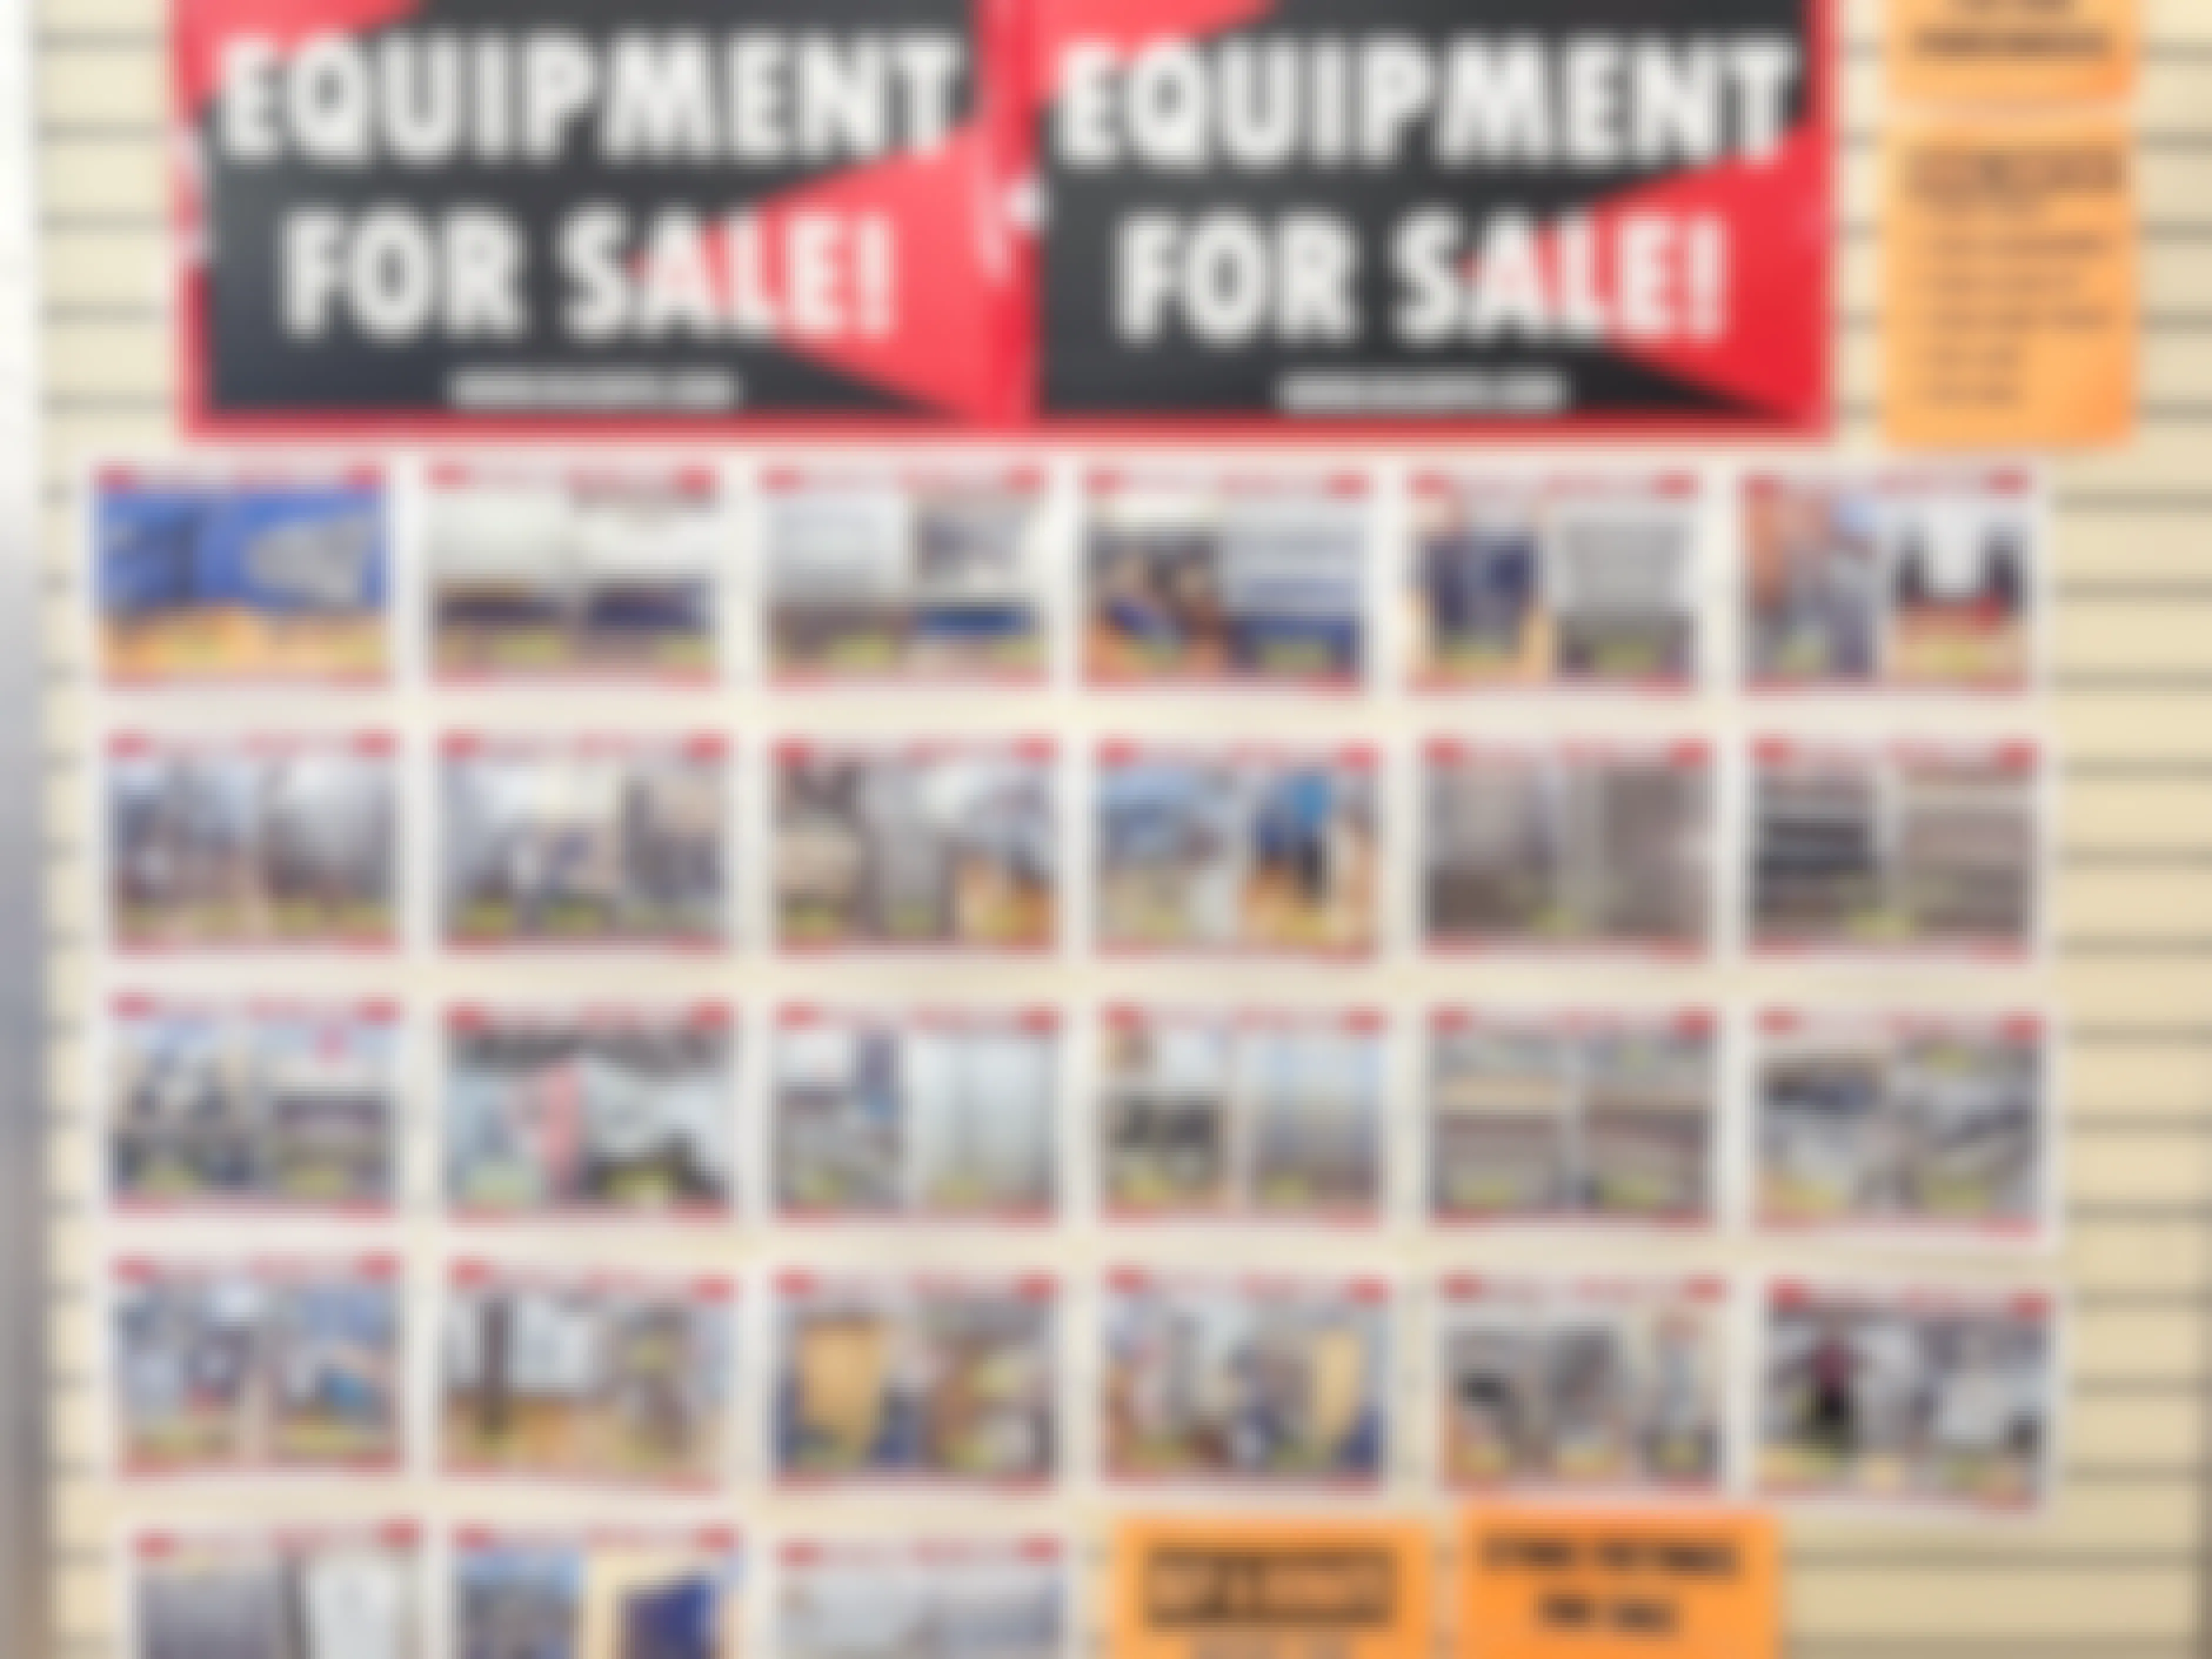 Fixtures and equipment for sale at the buybuyBaby liquidation sale